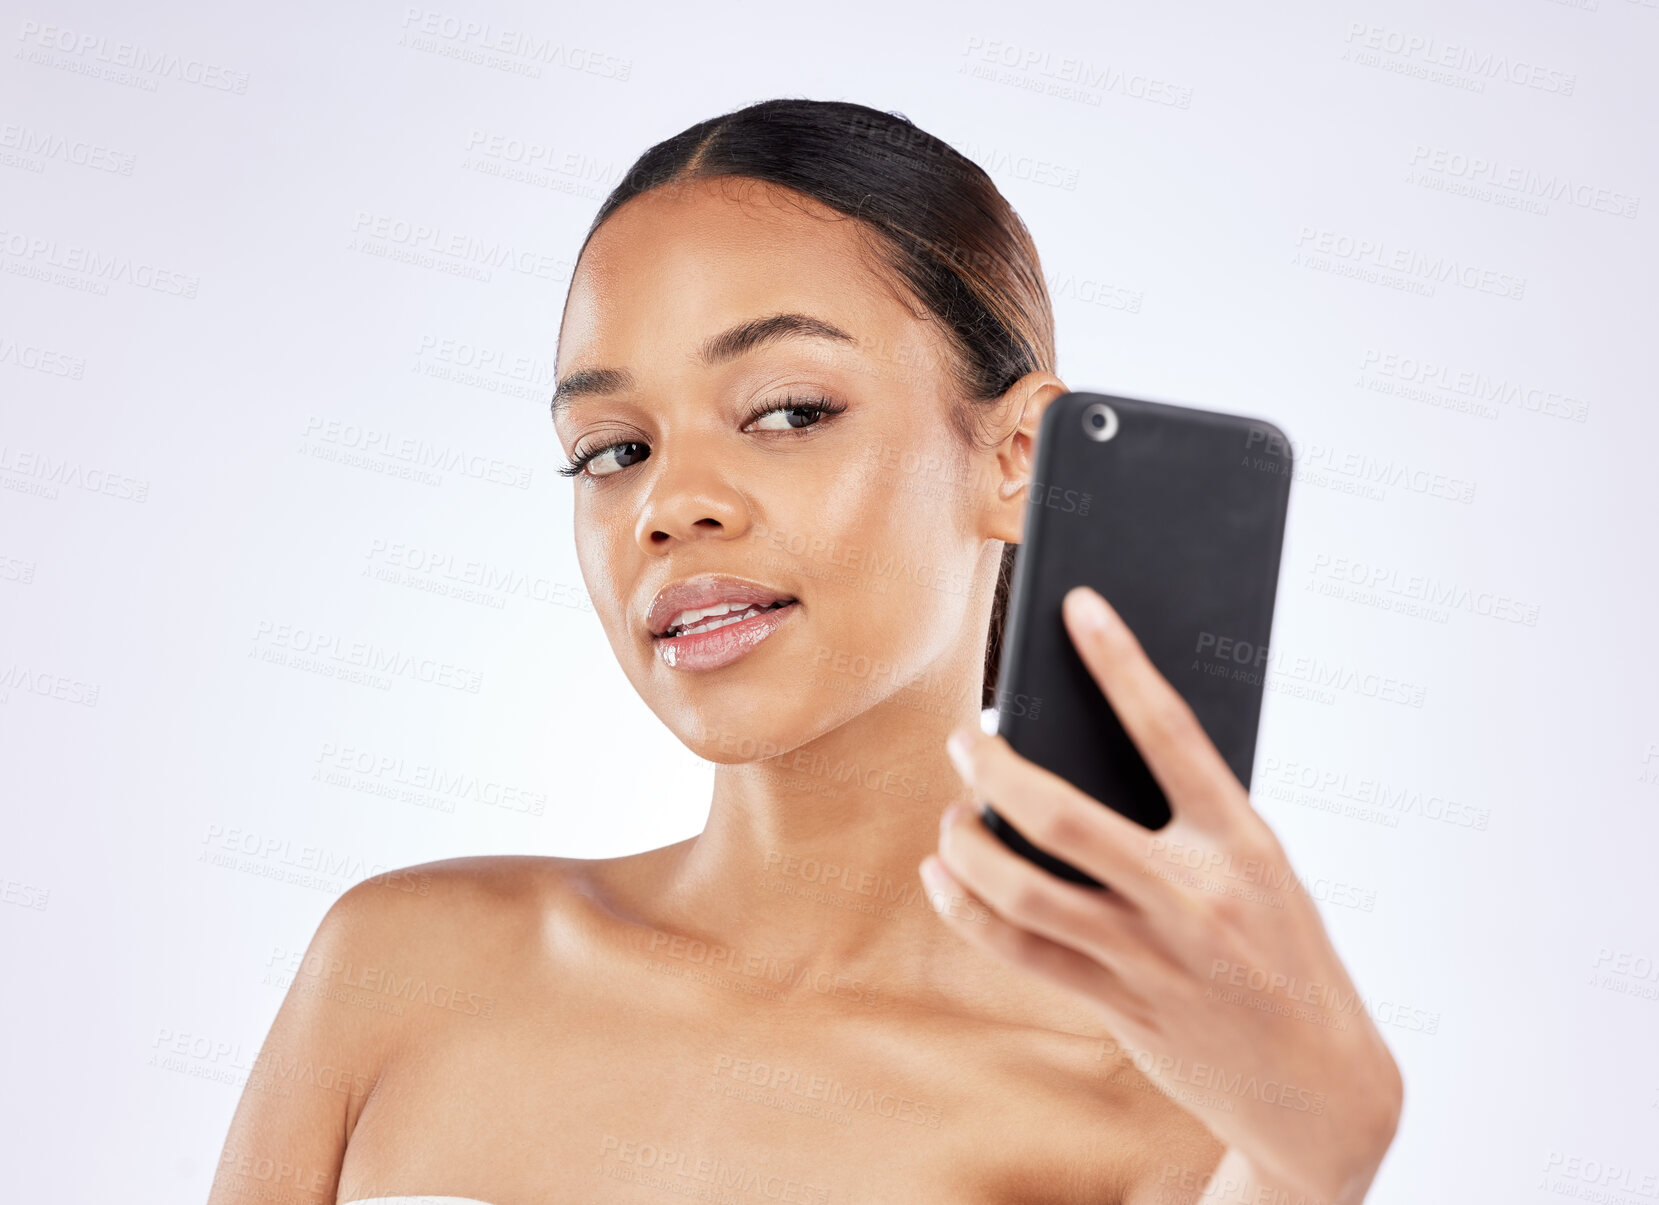 Buy stock photo Shot of a young woman talking selfies using a smartphone against a studio background